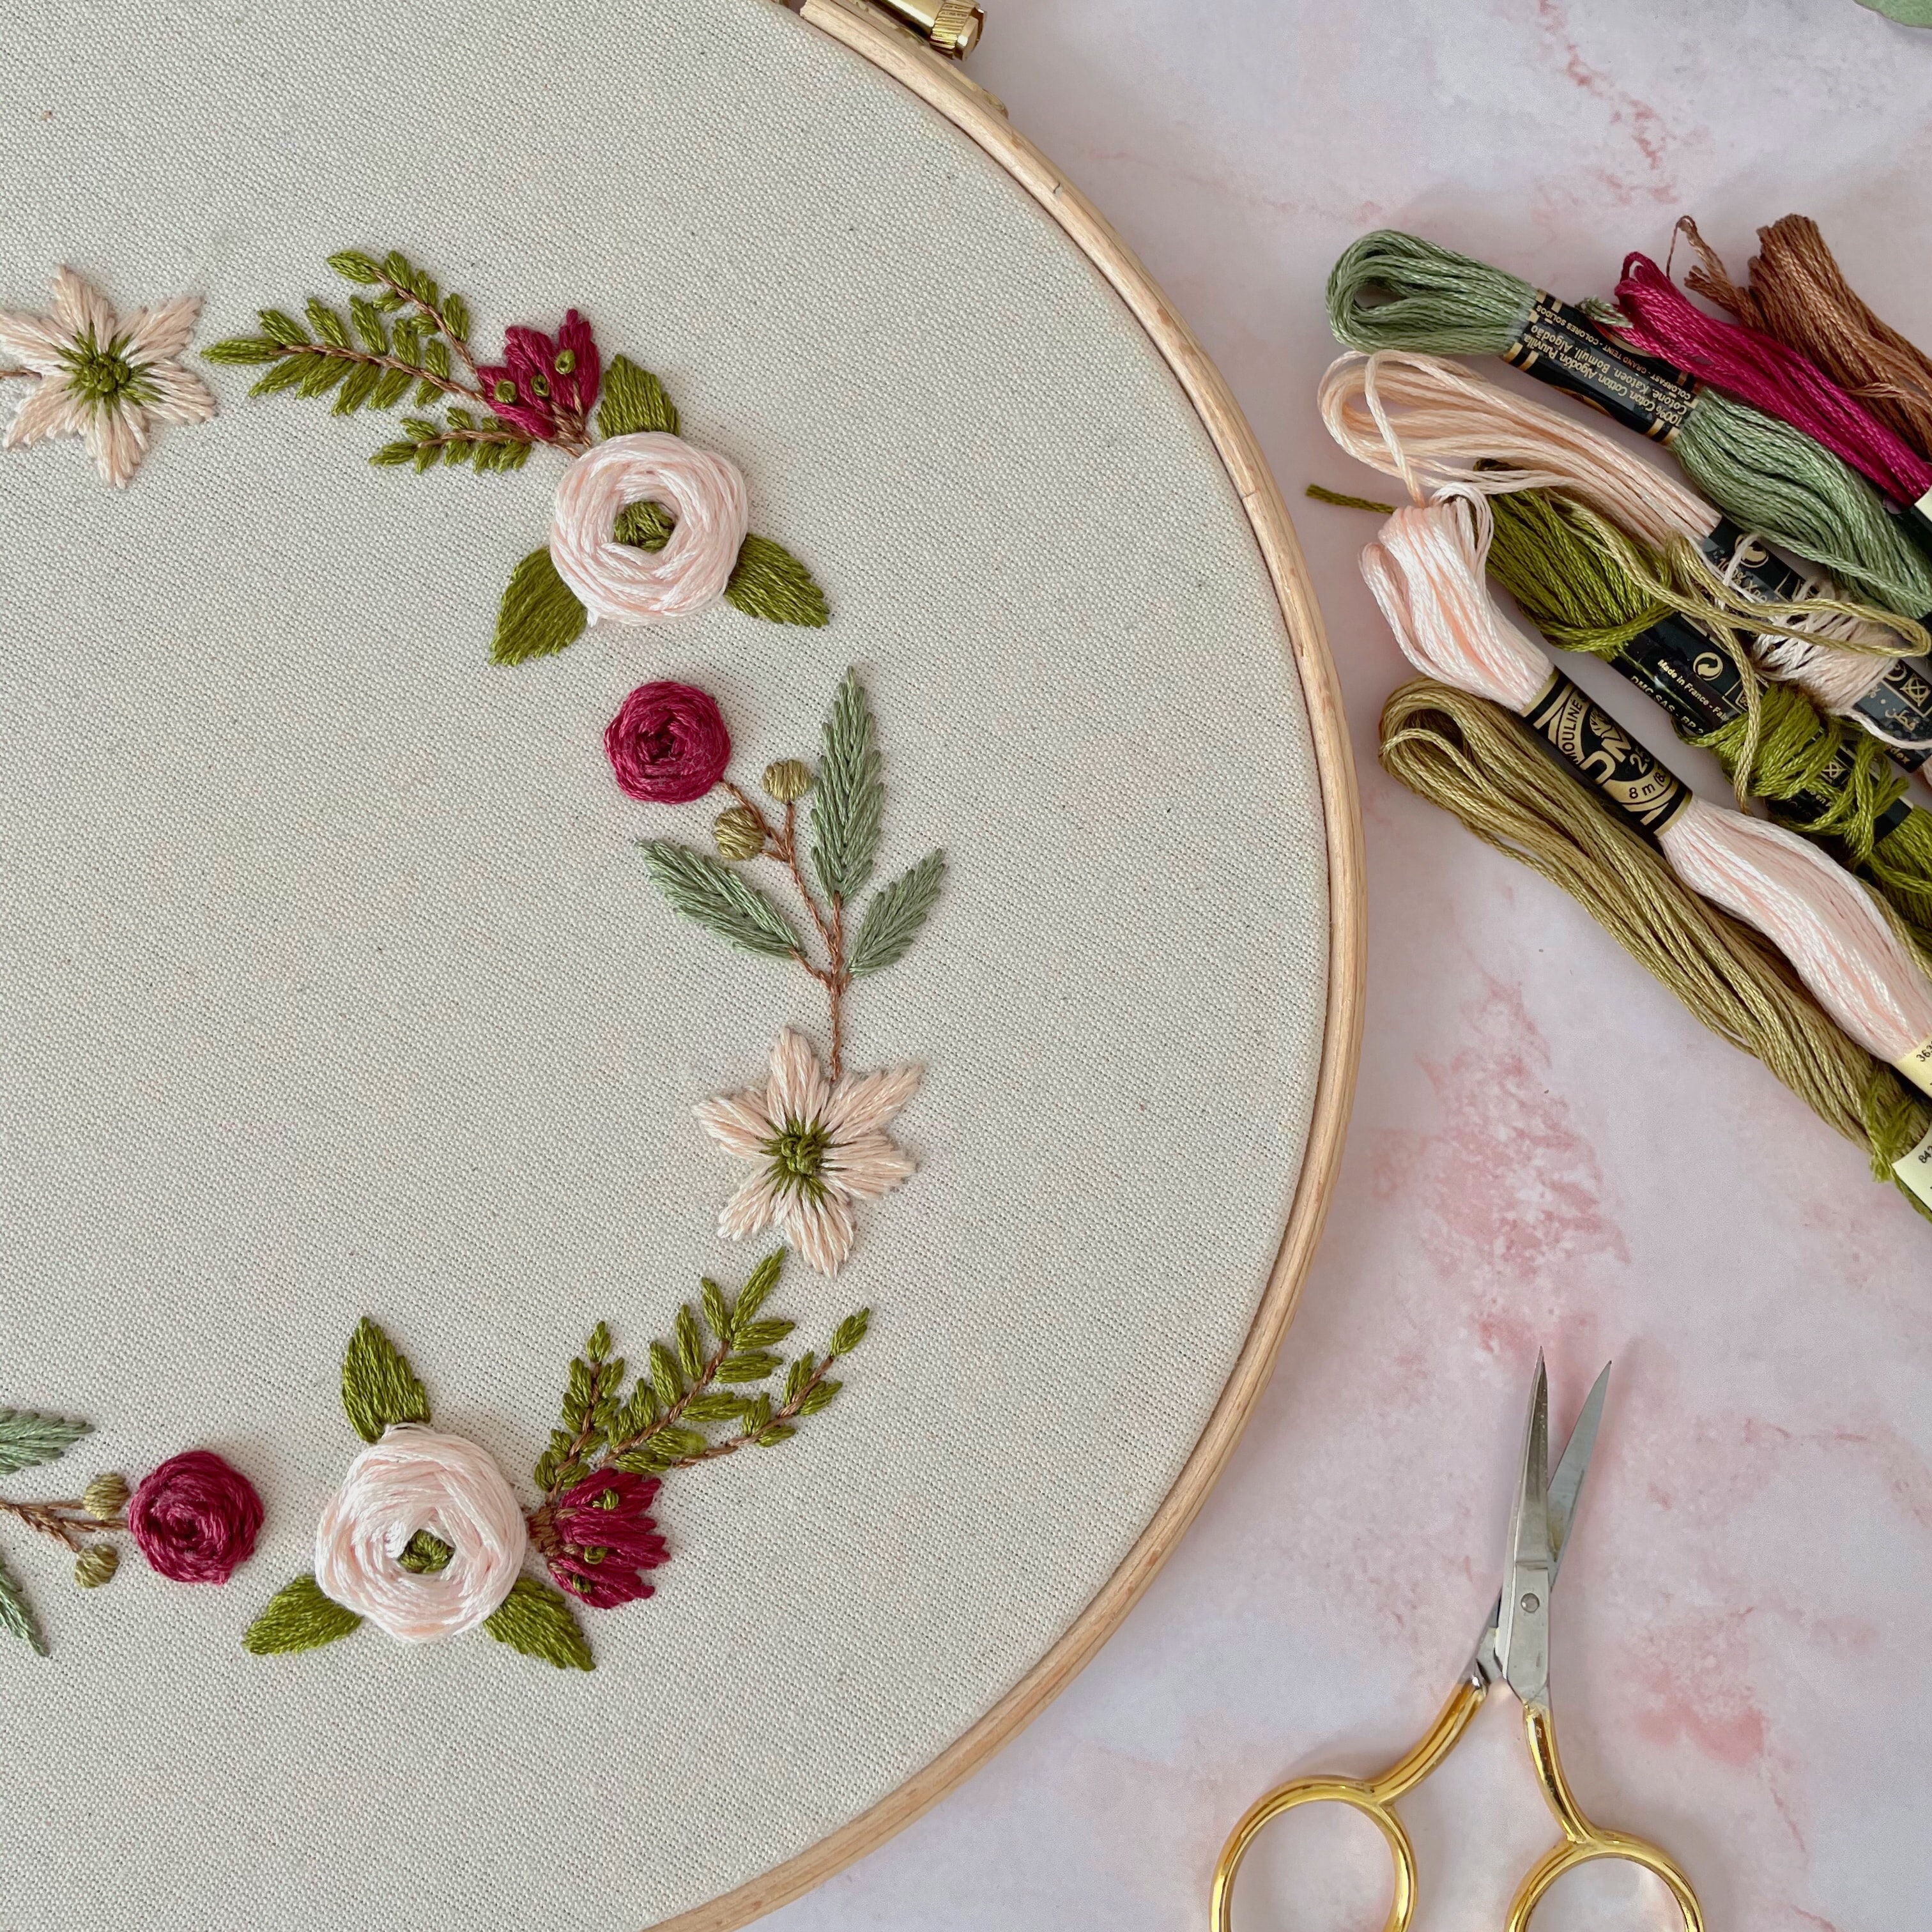 embroidered flowers with embroidery thread and scissors beside the hoop